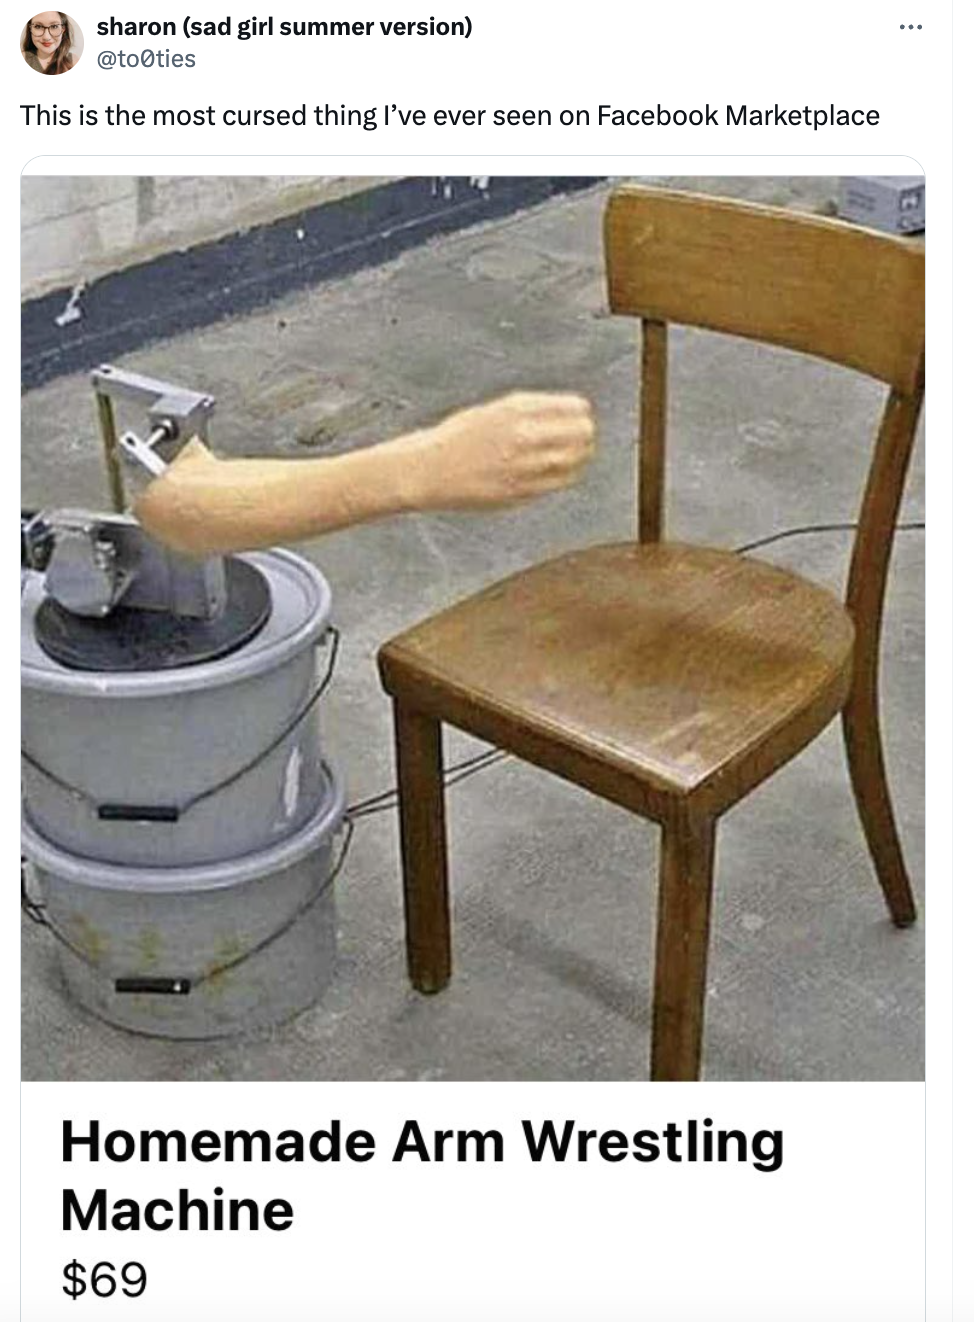 Wooden chair modified with fake human arm for arm wrestling, labeled &quot;Homemade Arm Wrestling Machine, $69&quot;